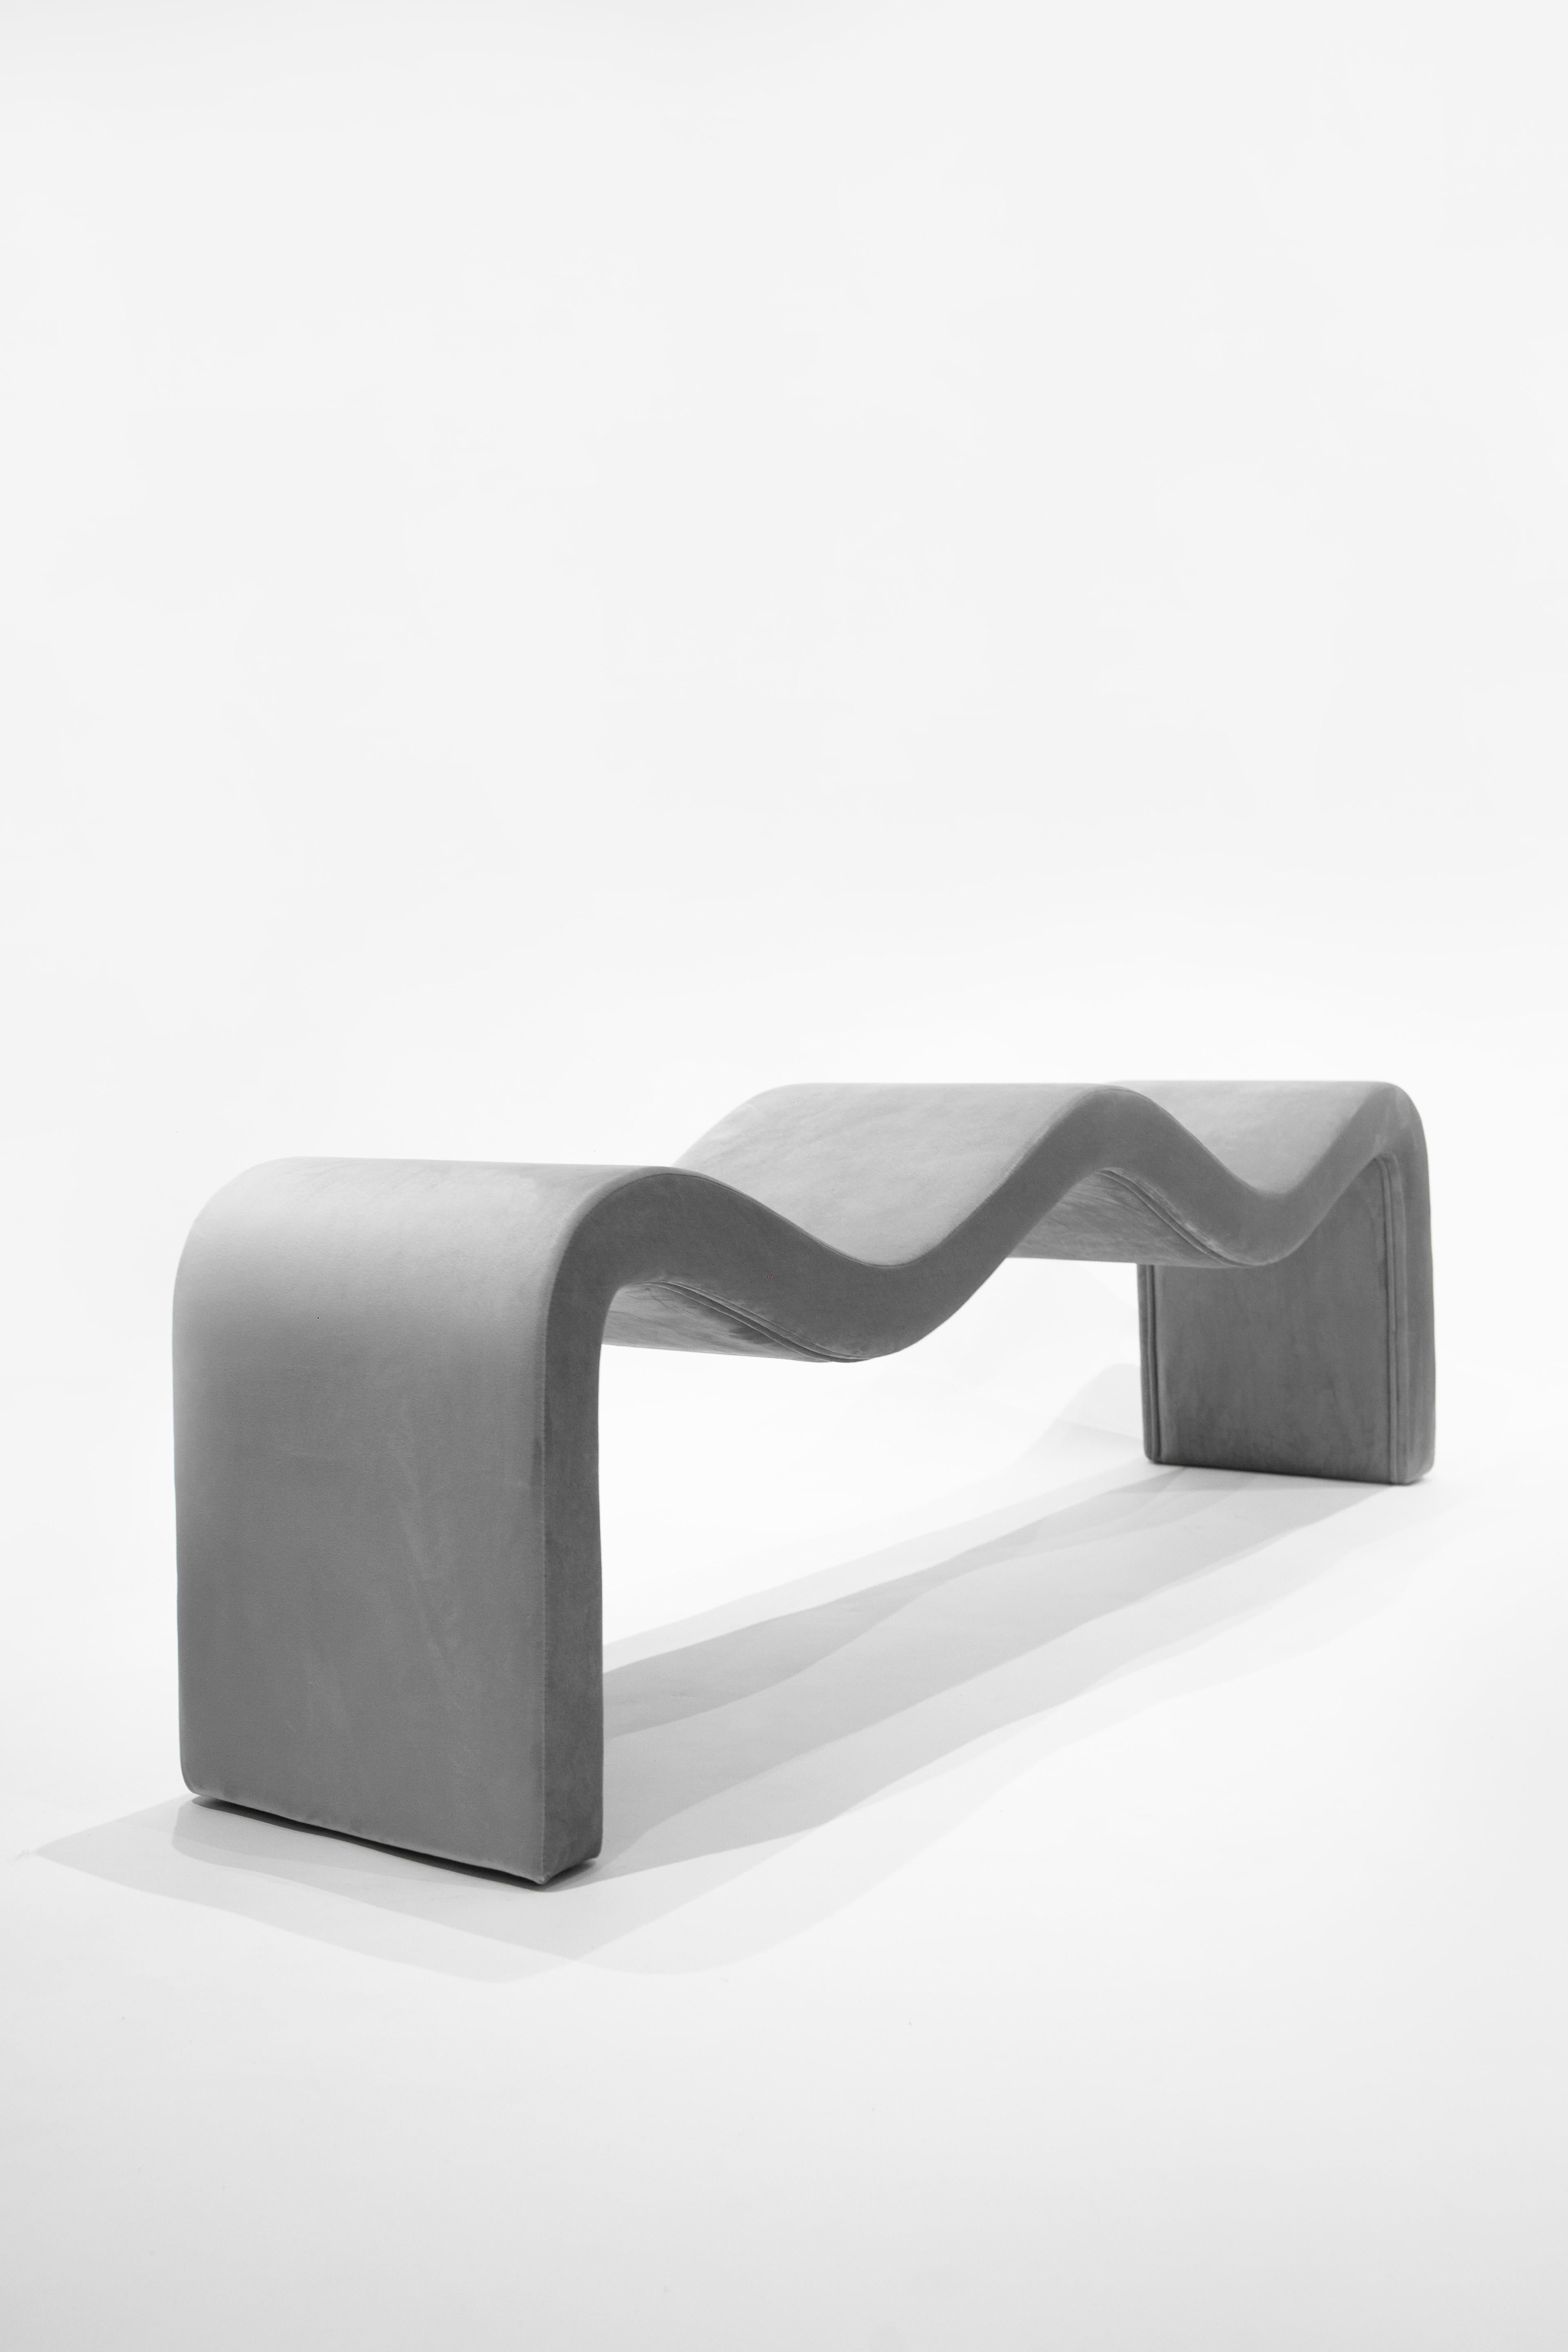 European Wavy Bench in Silver Plush Fabric For Sale